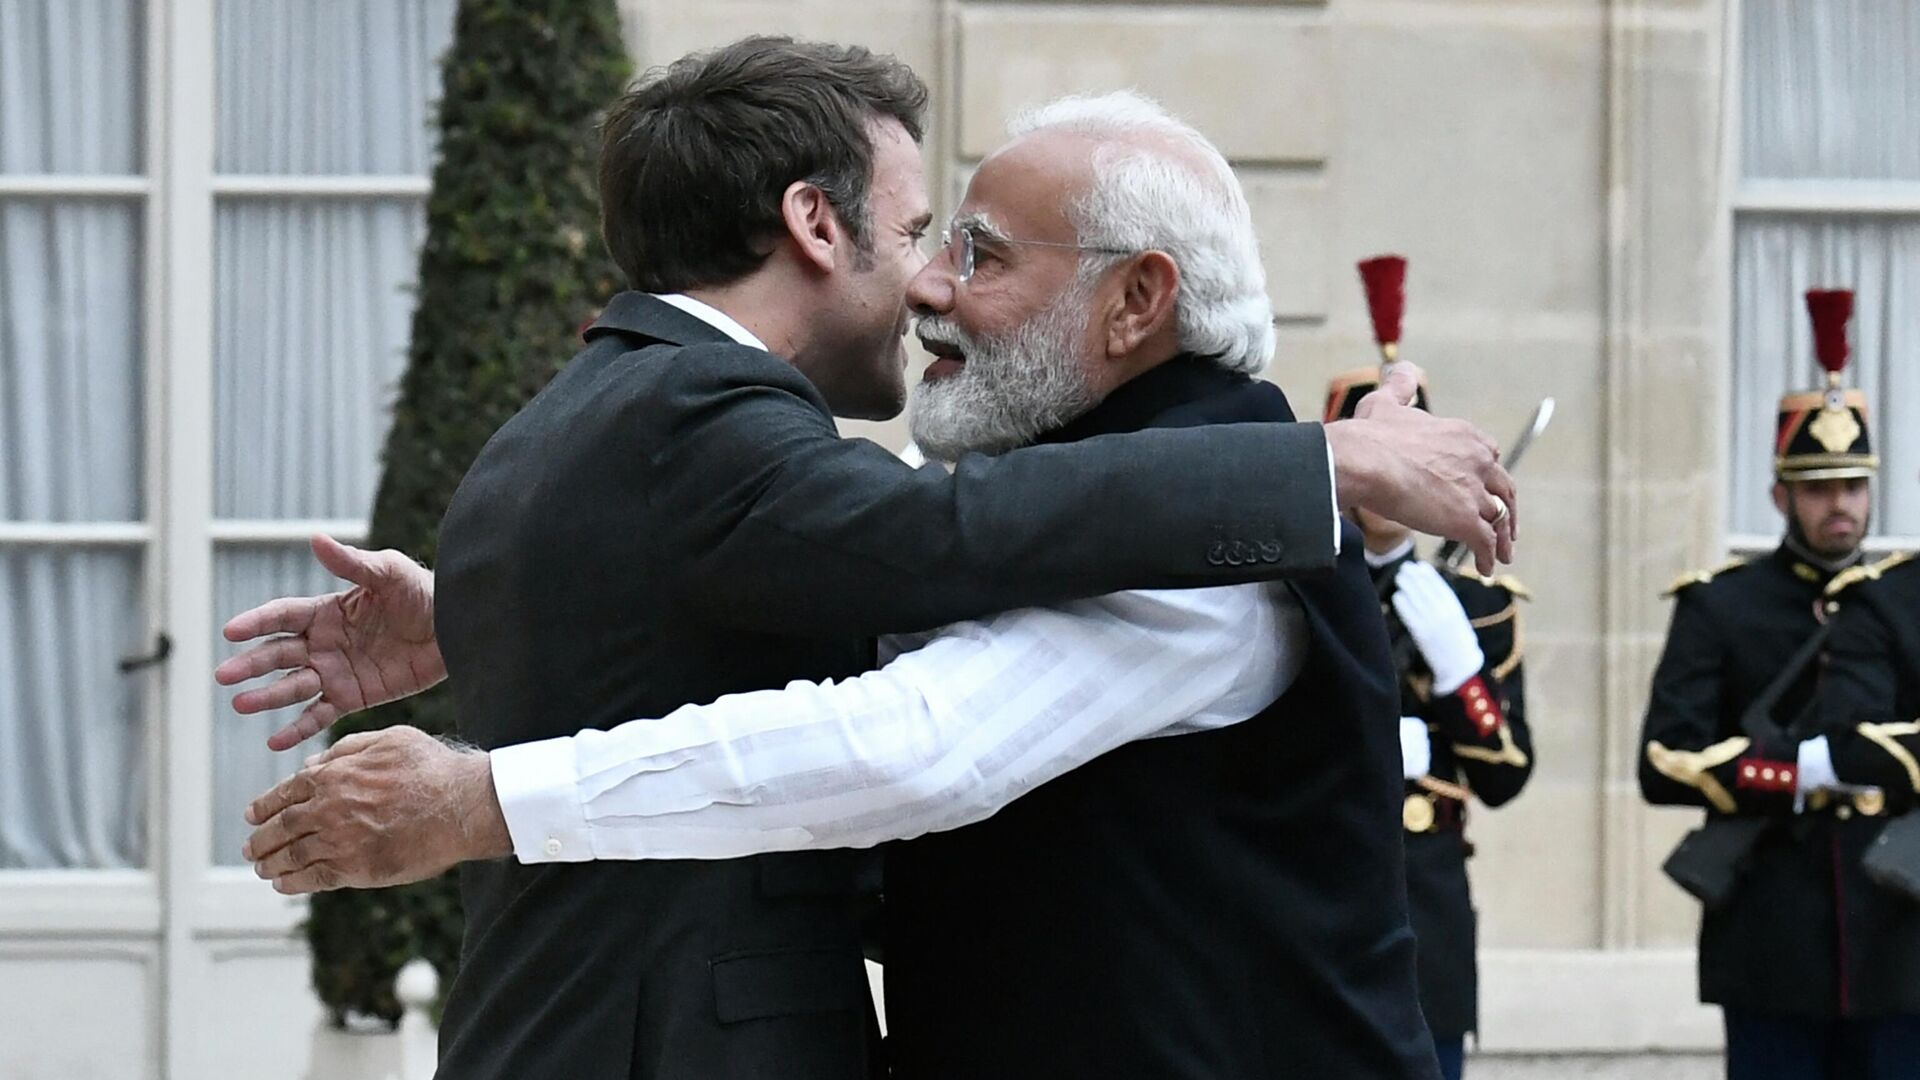 France's President Emmanuel Macron (L) welcomes India's Prime Minister Narendra Modi (R) for a meeting at the Elysee Palace in Paris, on May 4, 2022 - Sputnik International, 1920, 05.05.2022